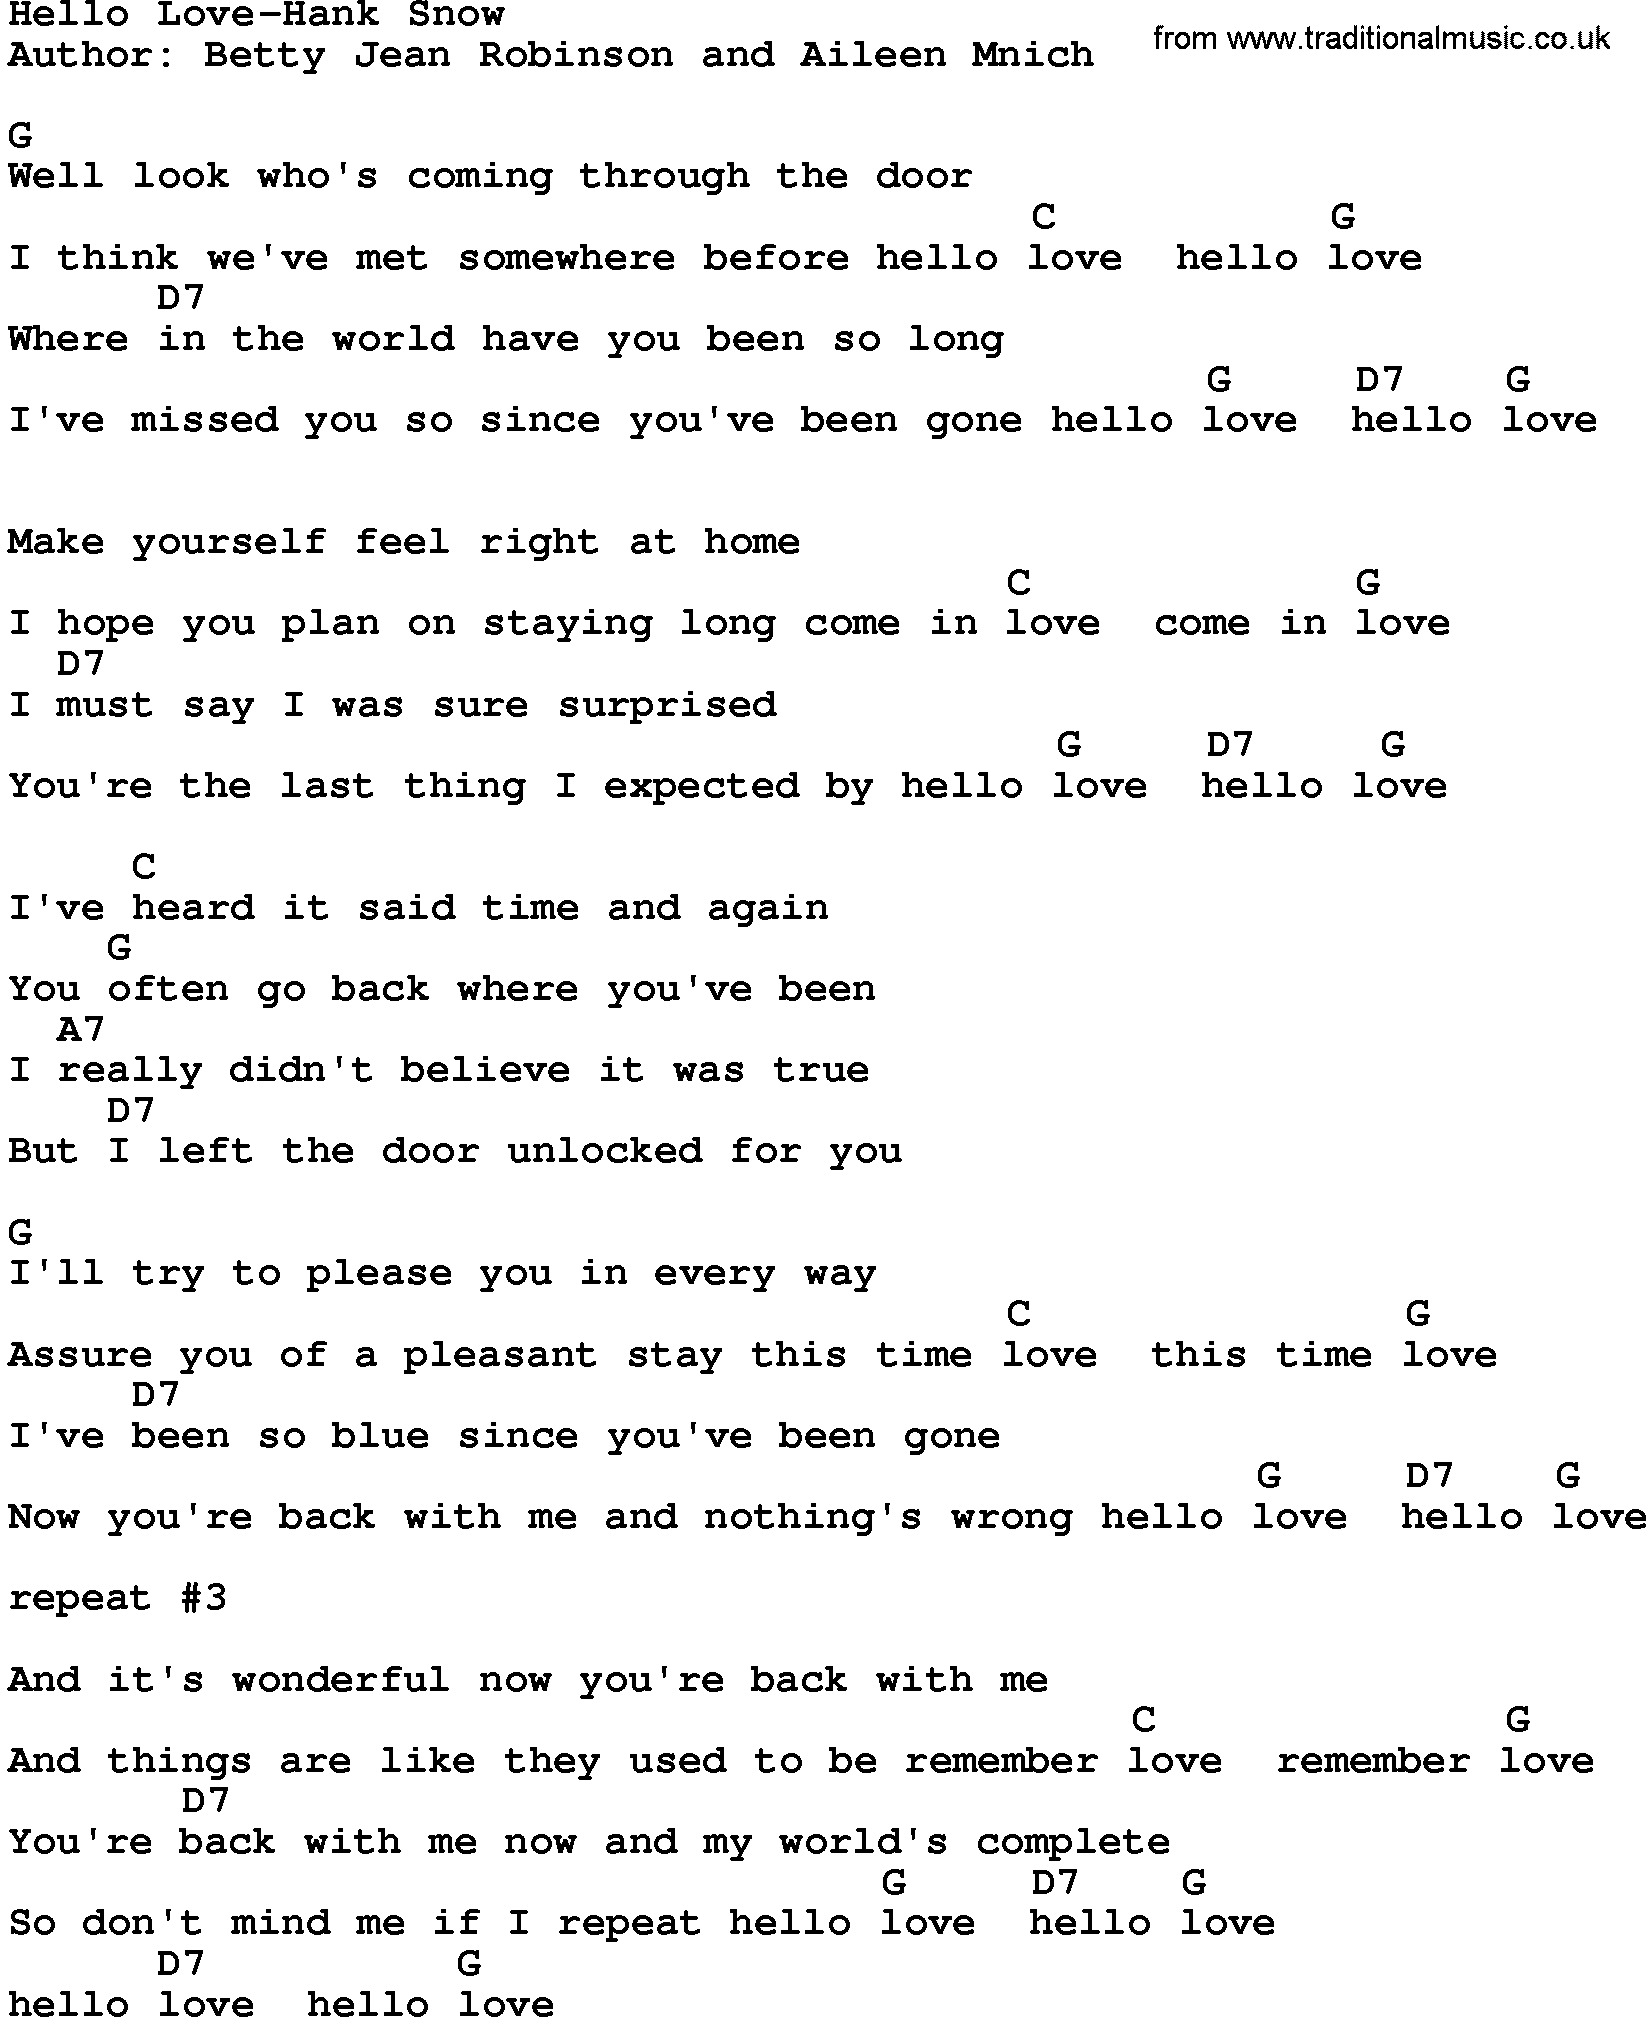 Country music song: Hello Love-Hank Snow lyrics and chords